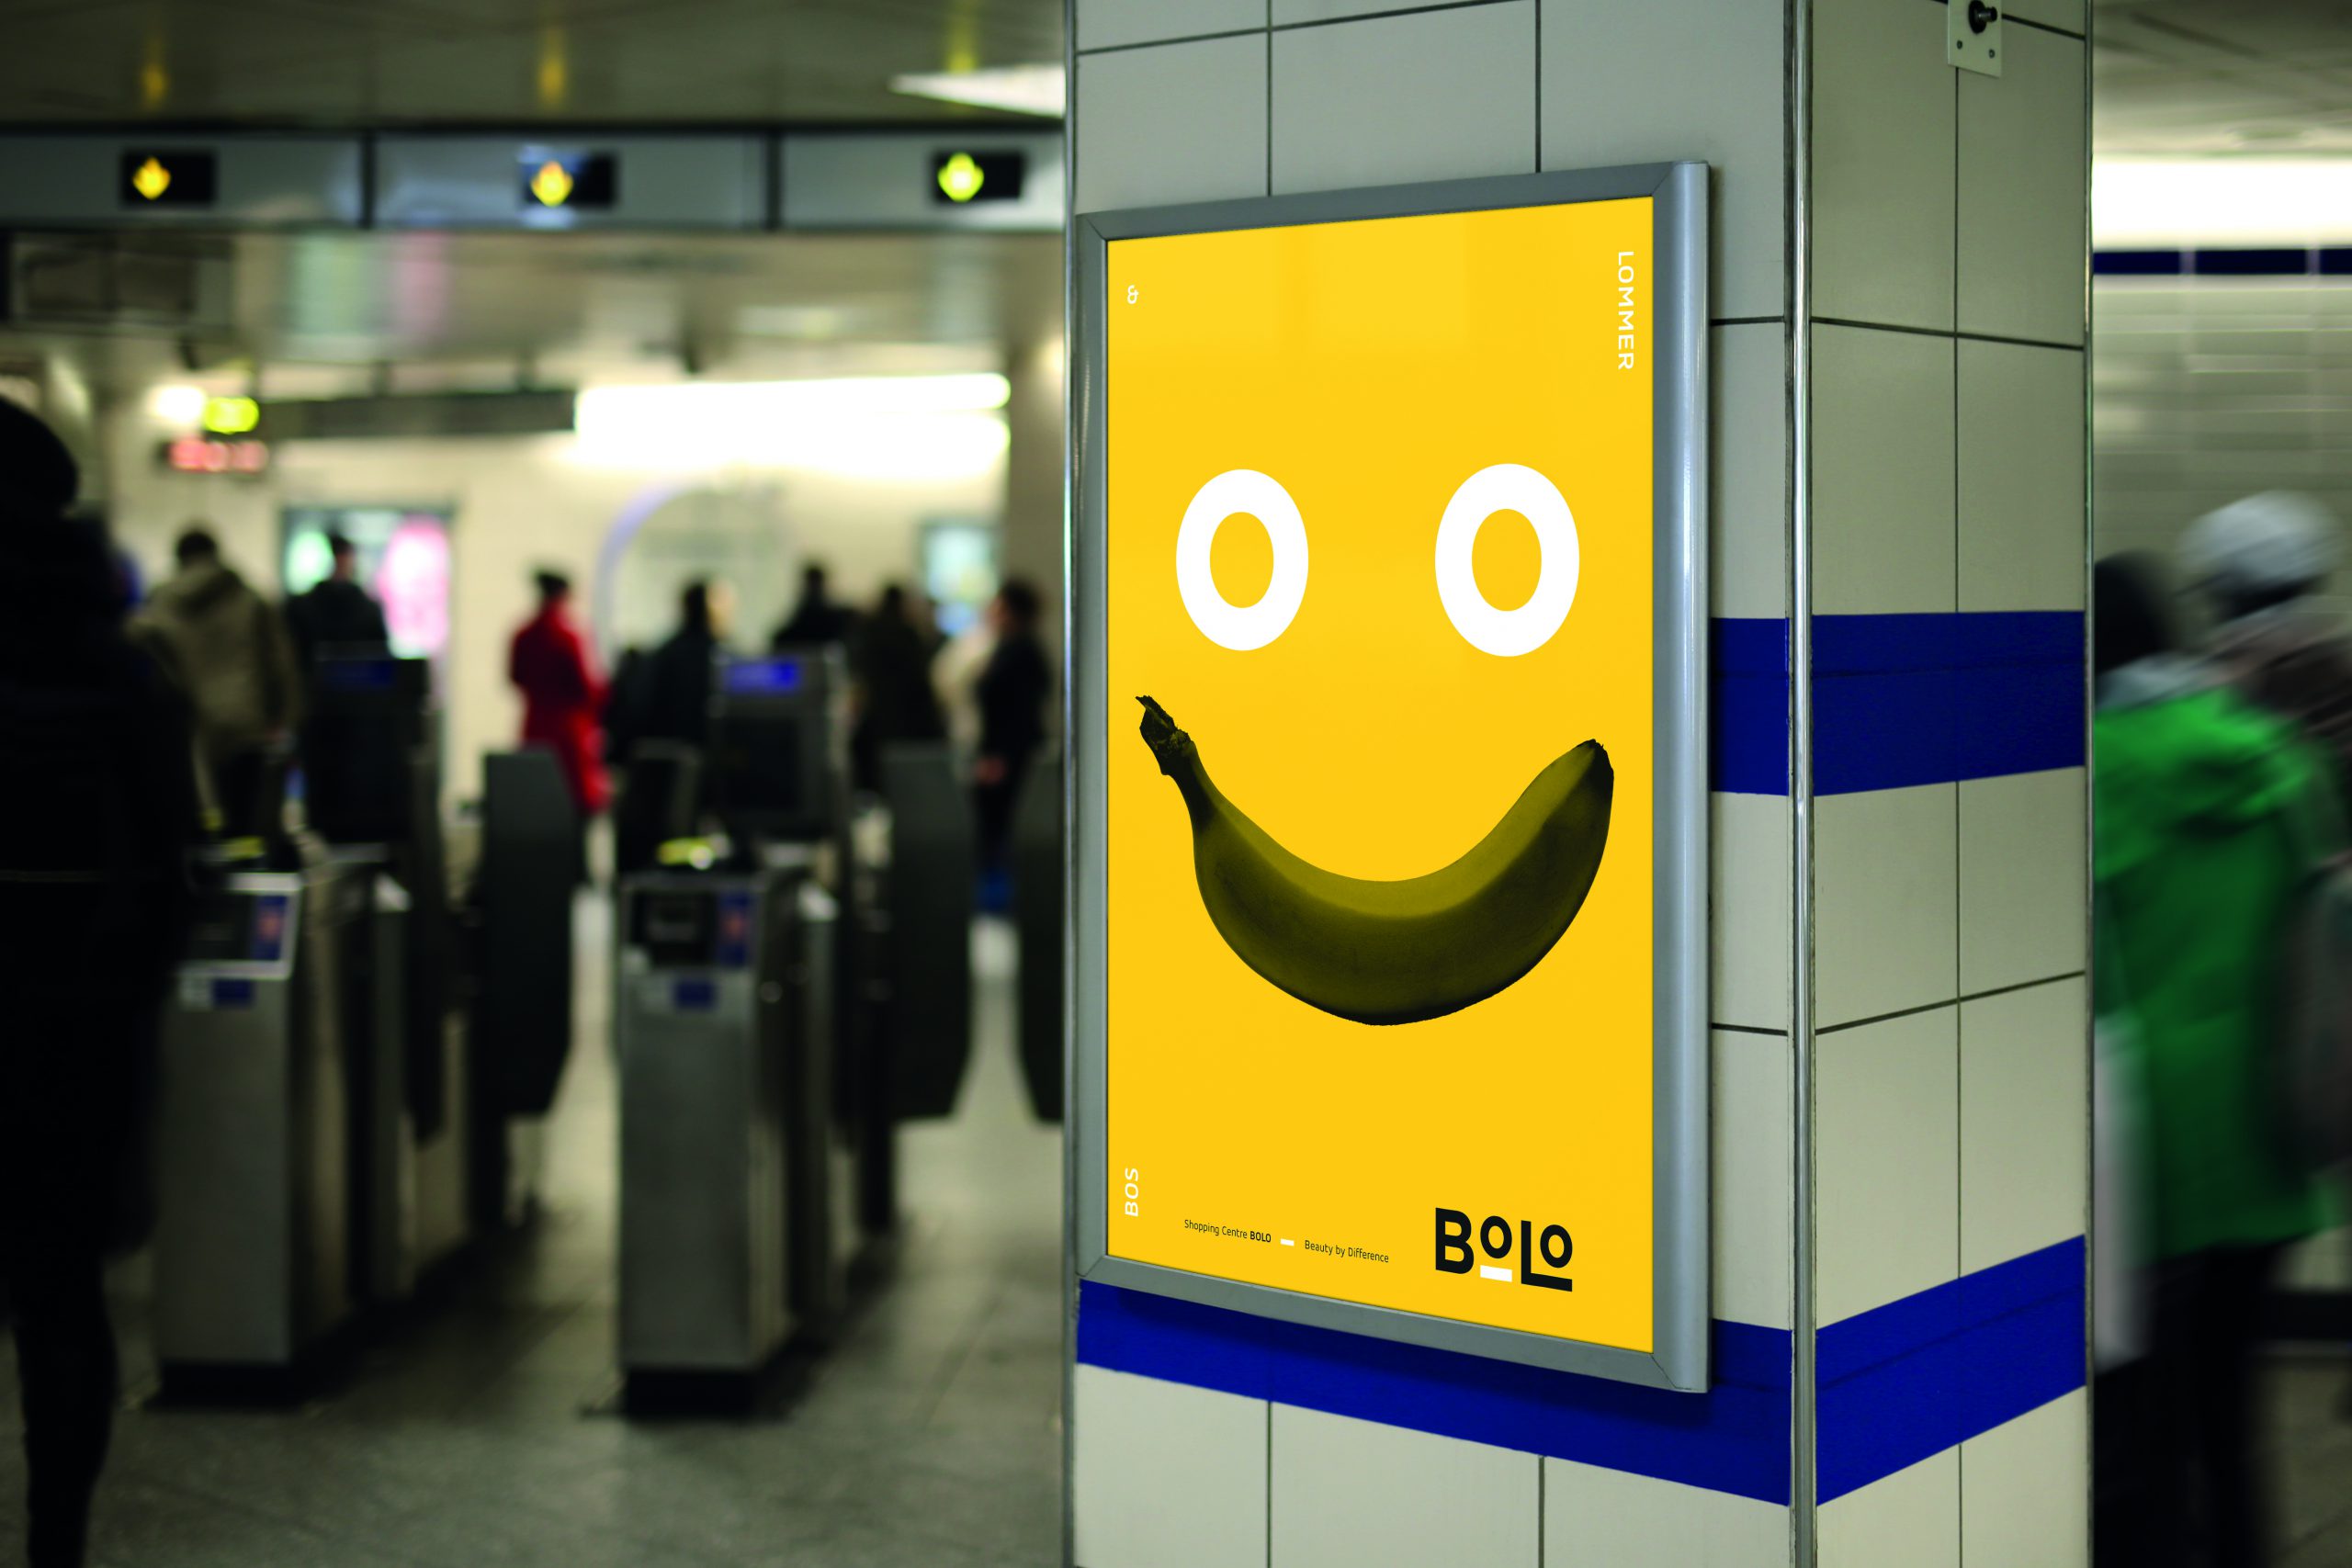 Station_ams_advertising1